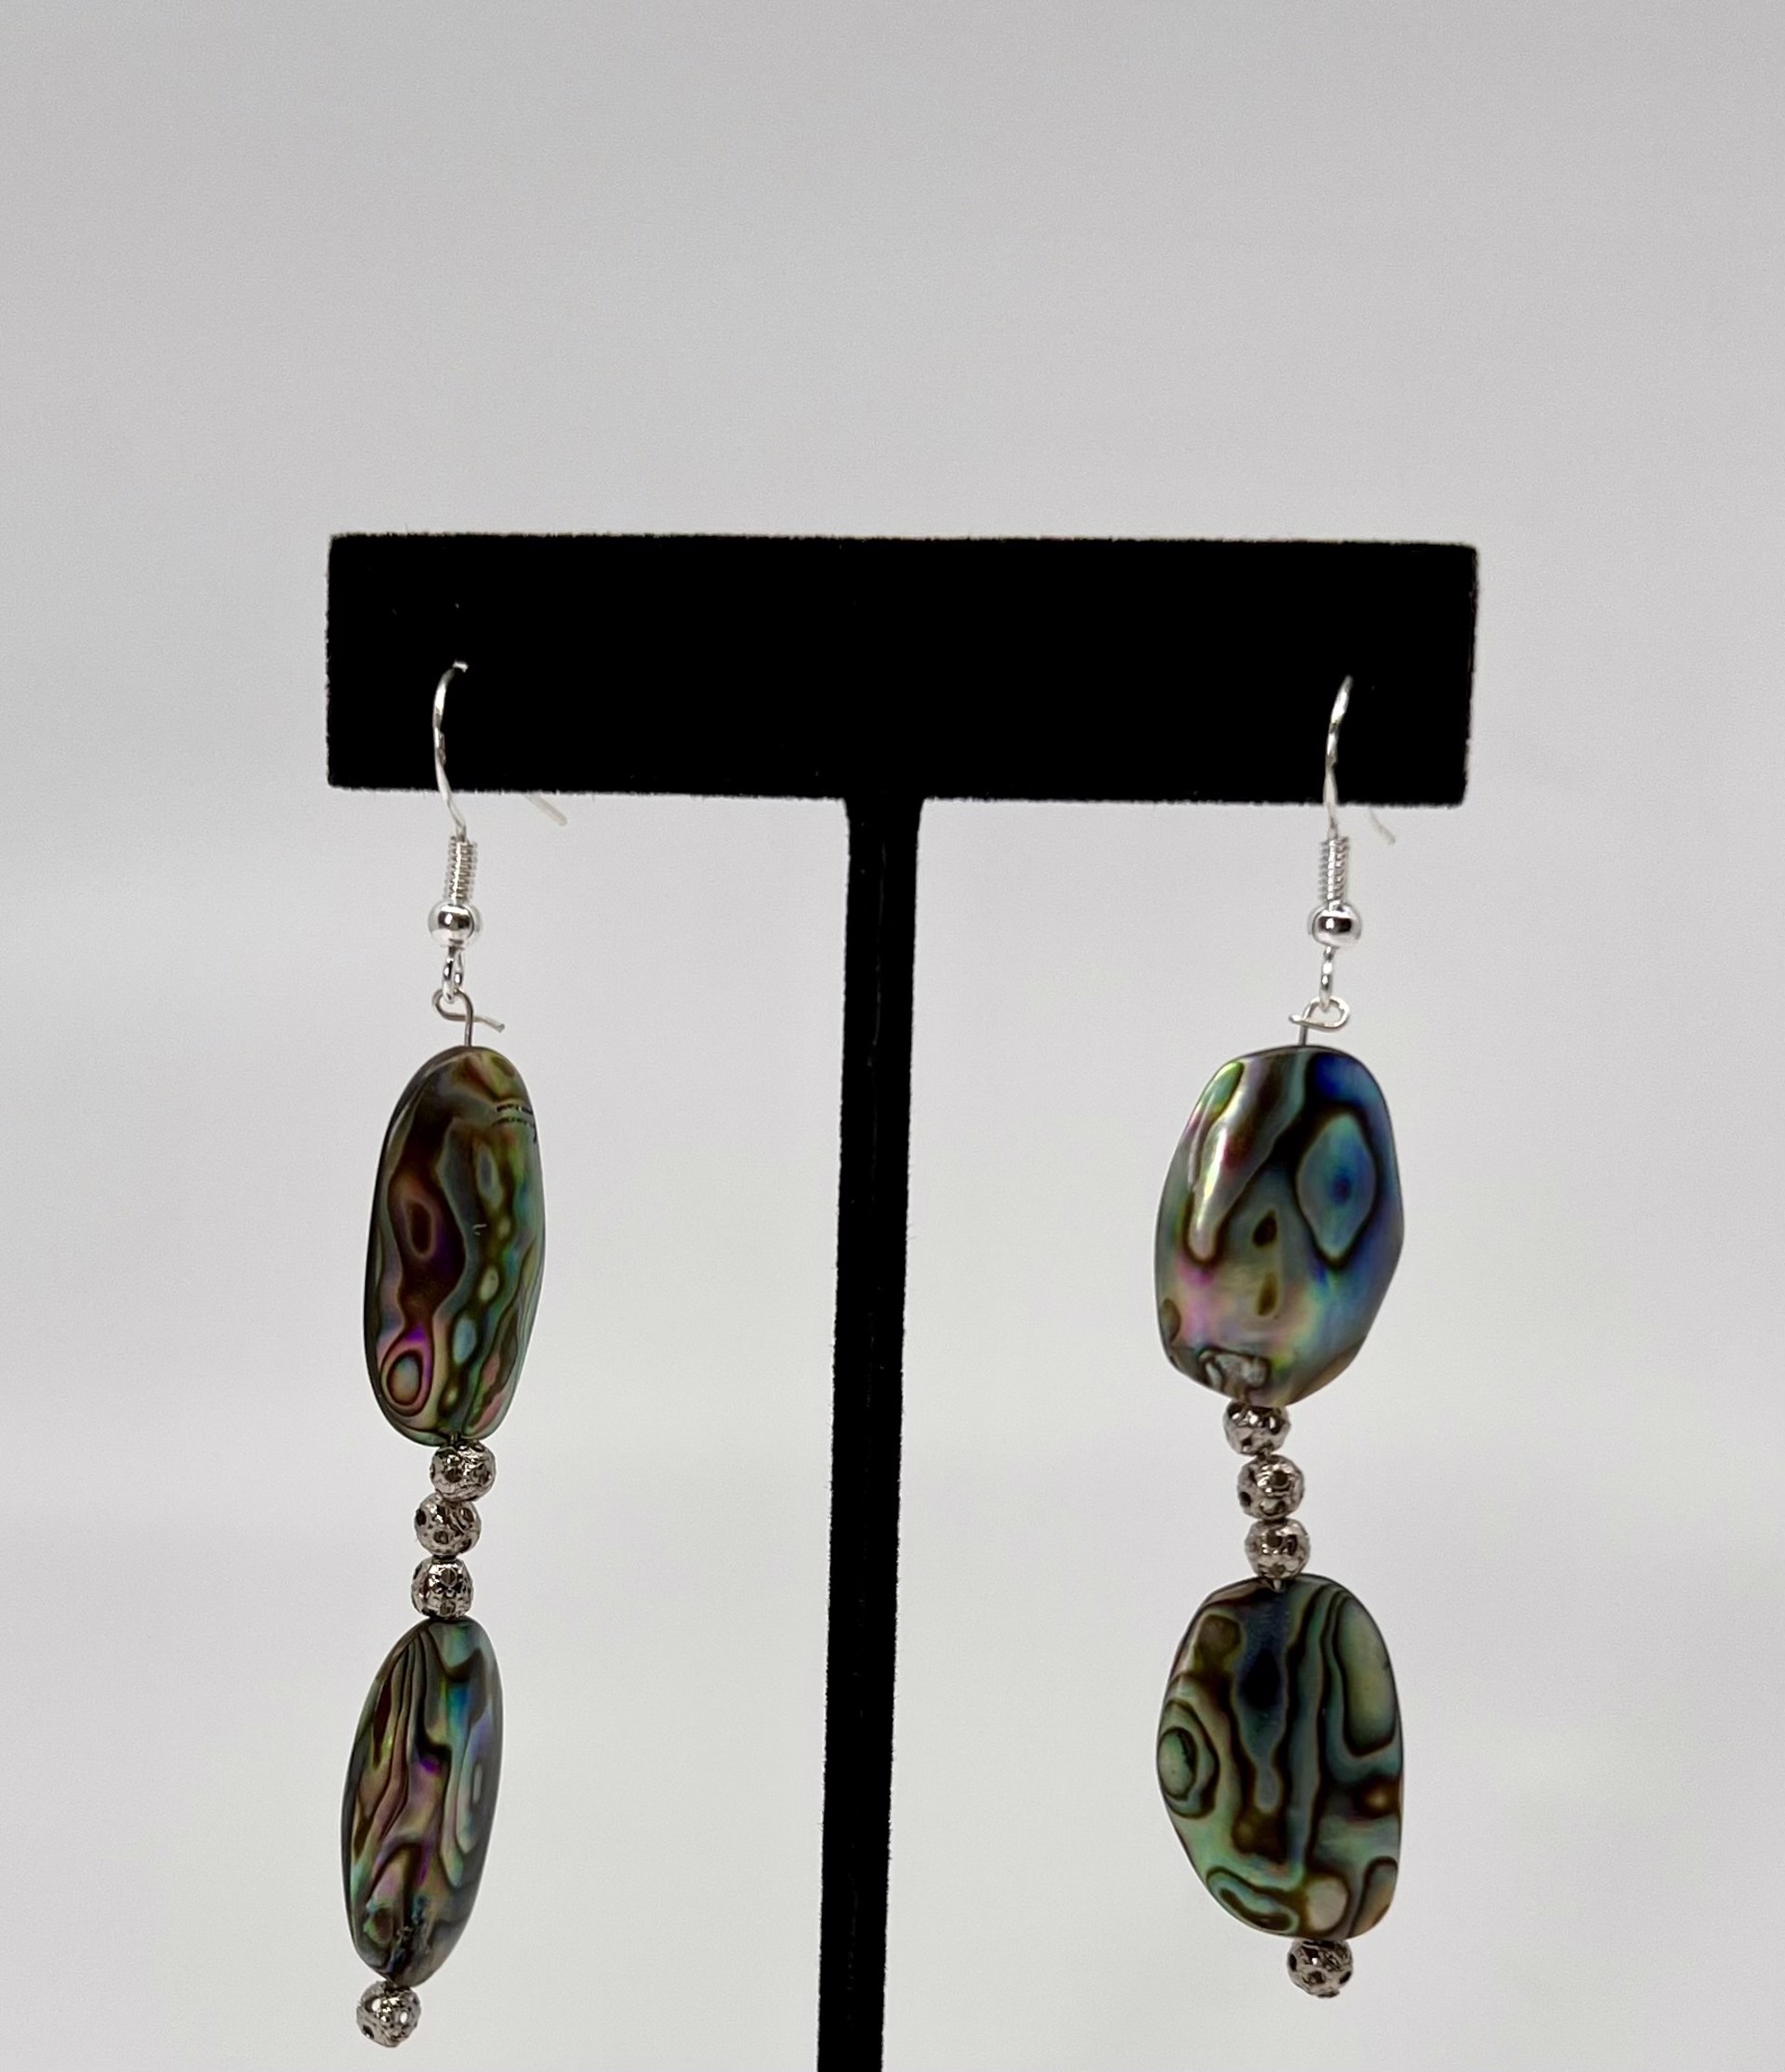 Abalone Earrings with Filigree Beads Two Stones by Gina Caruso